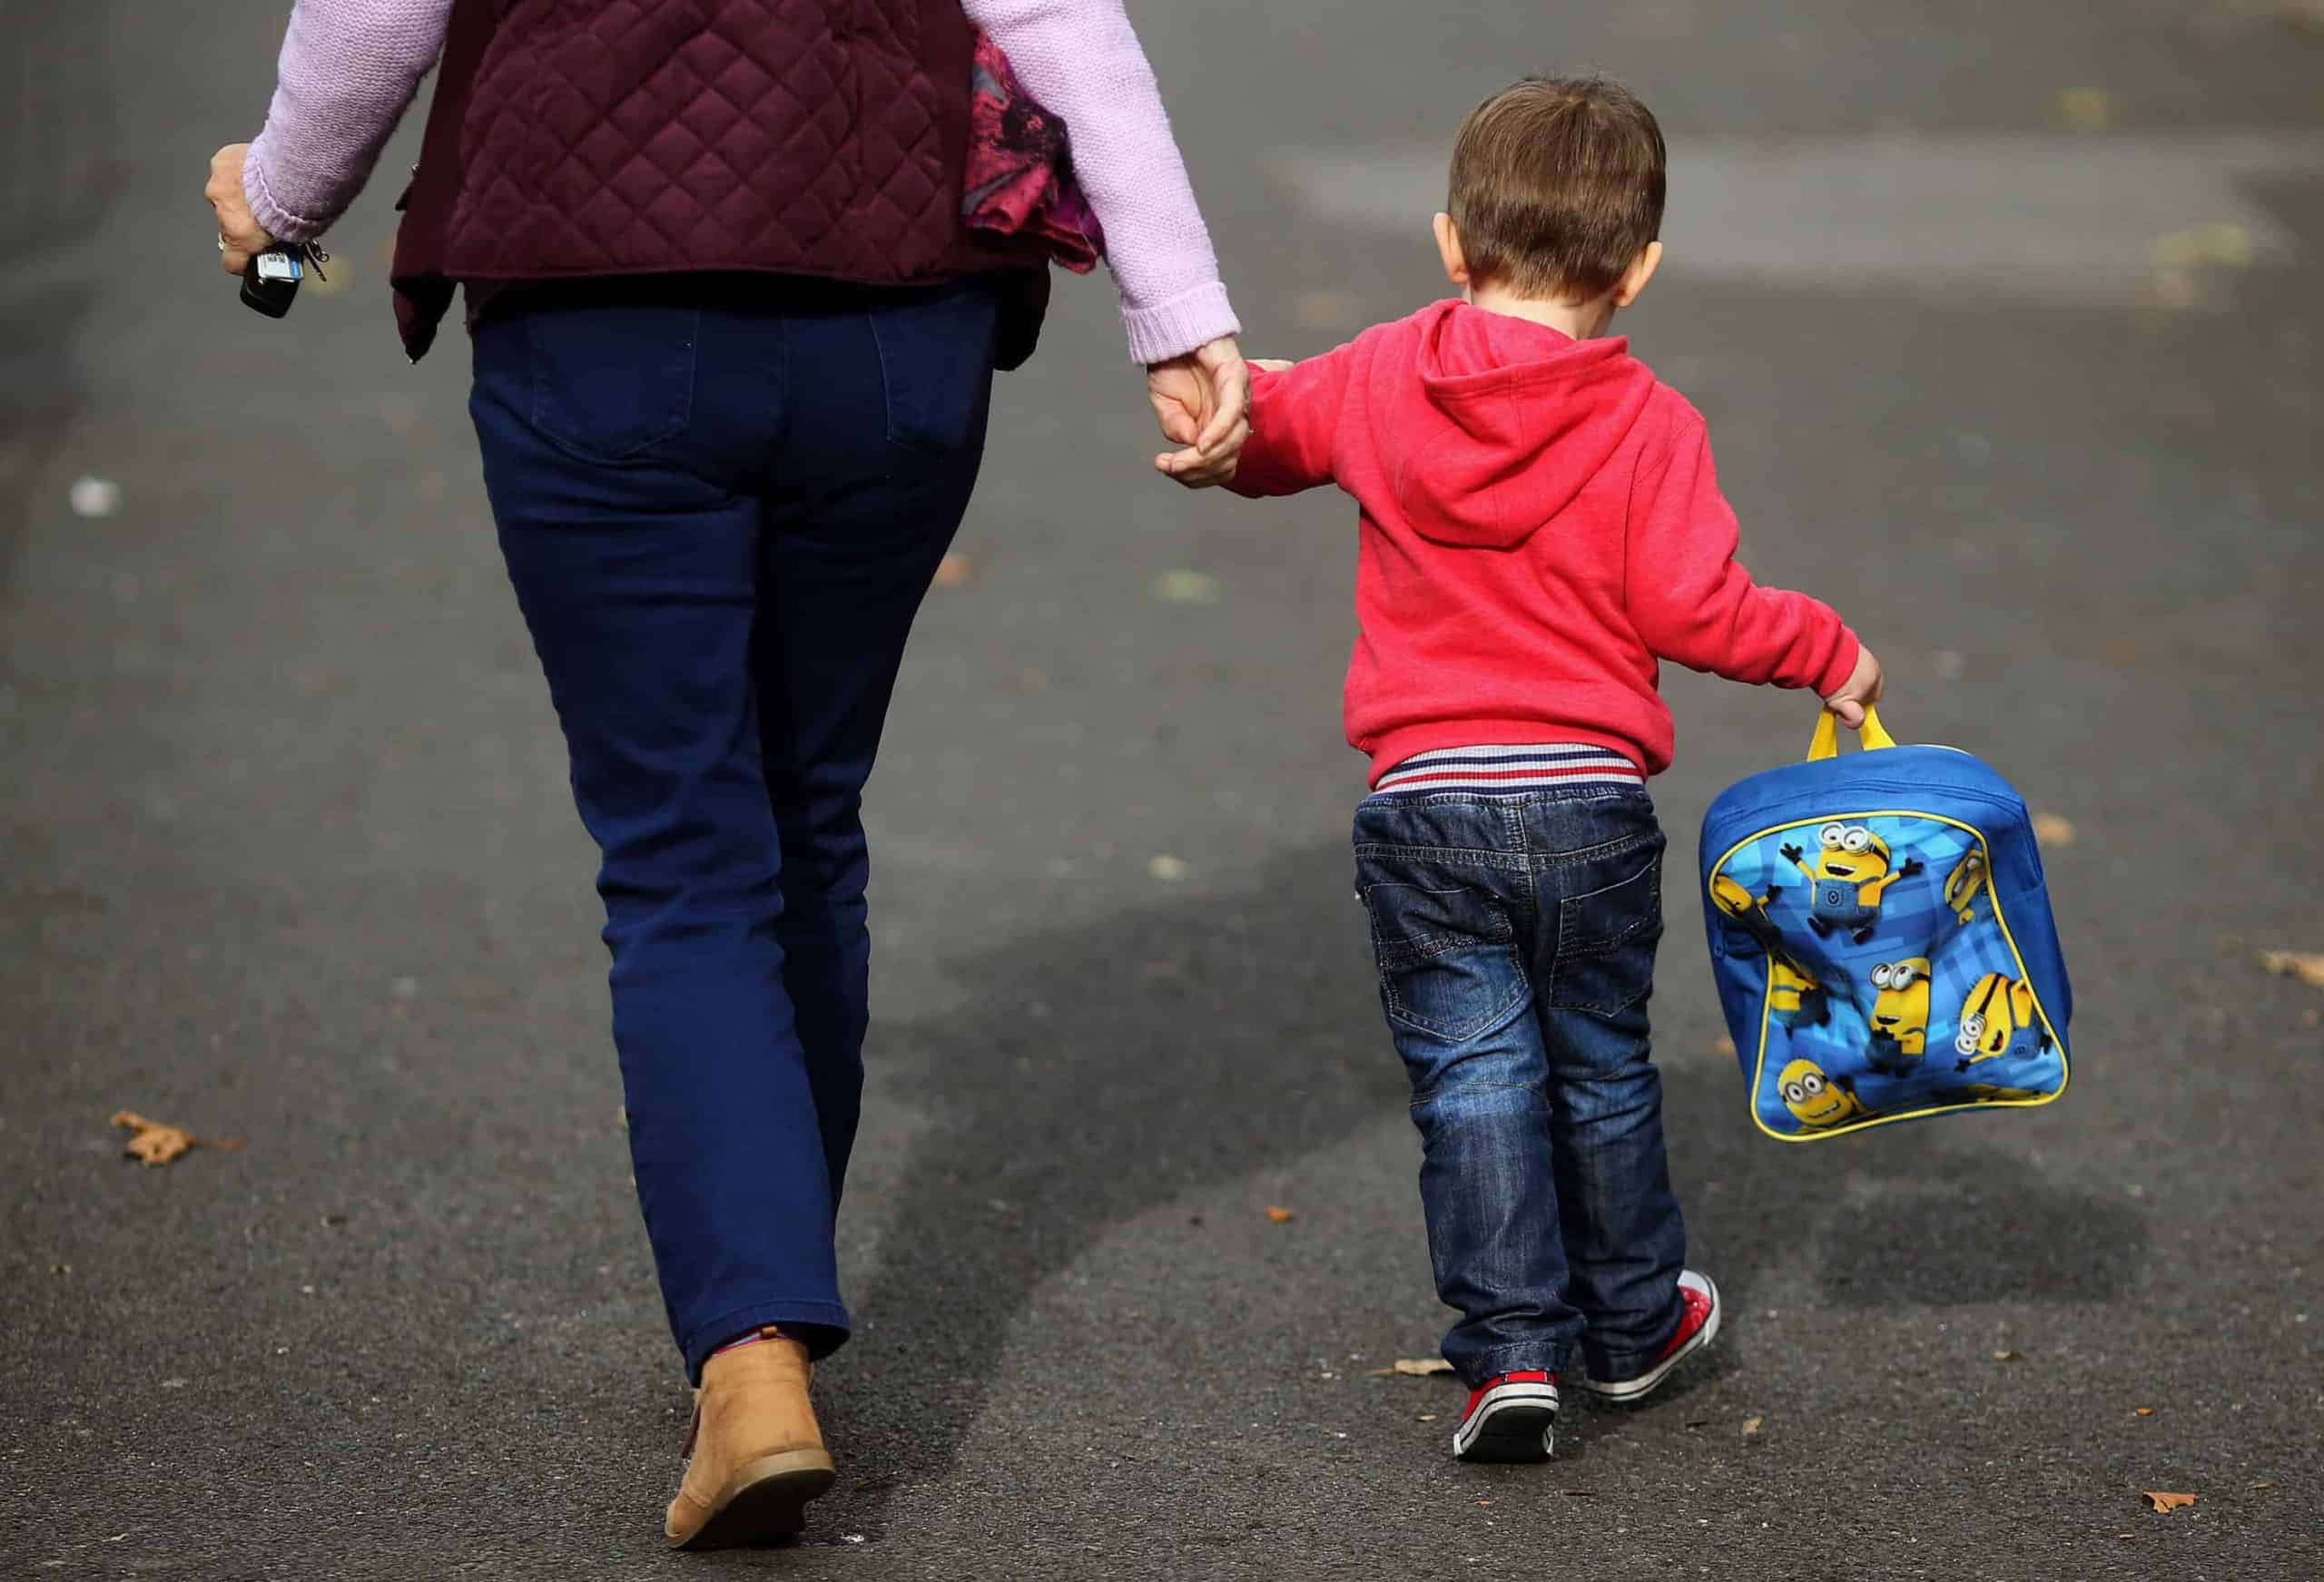 Child poverty would reach ’60-year-high’ if Conservatives re-elected